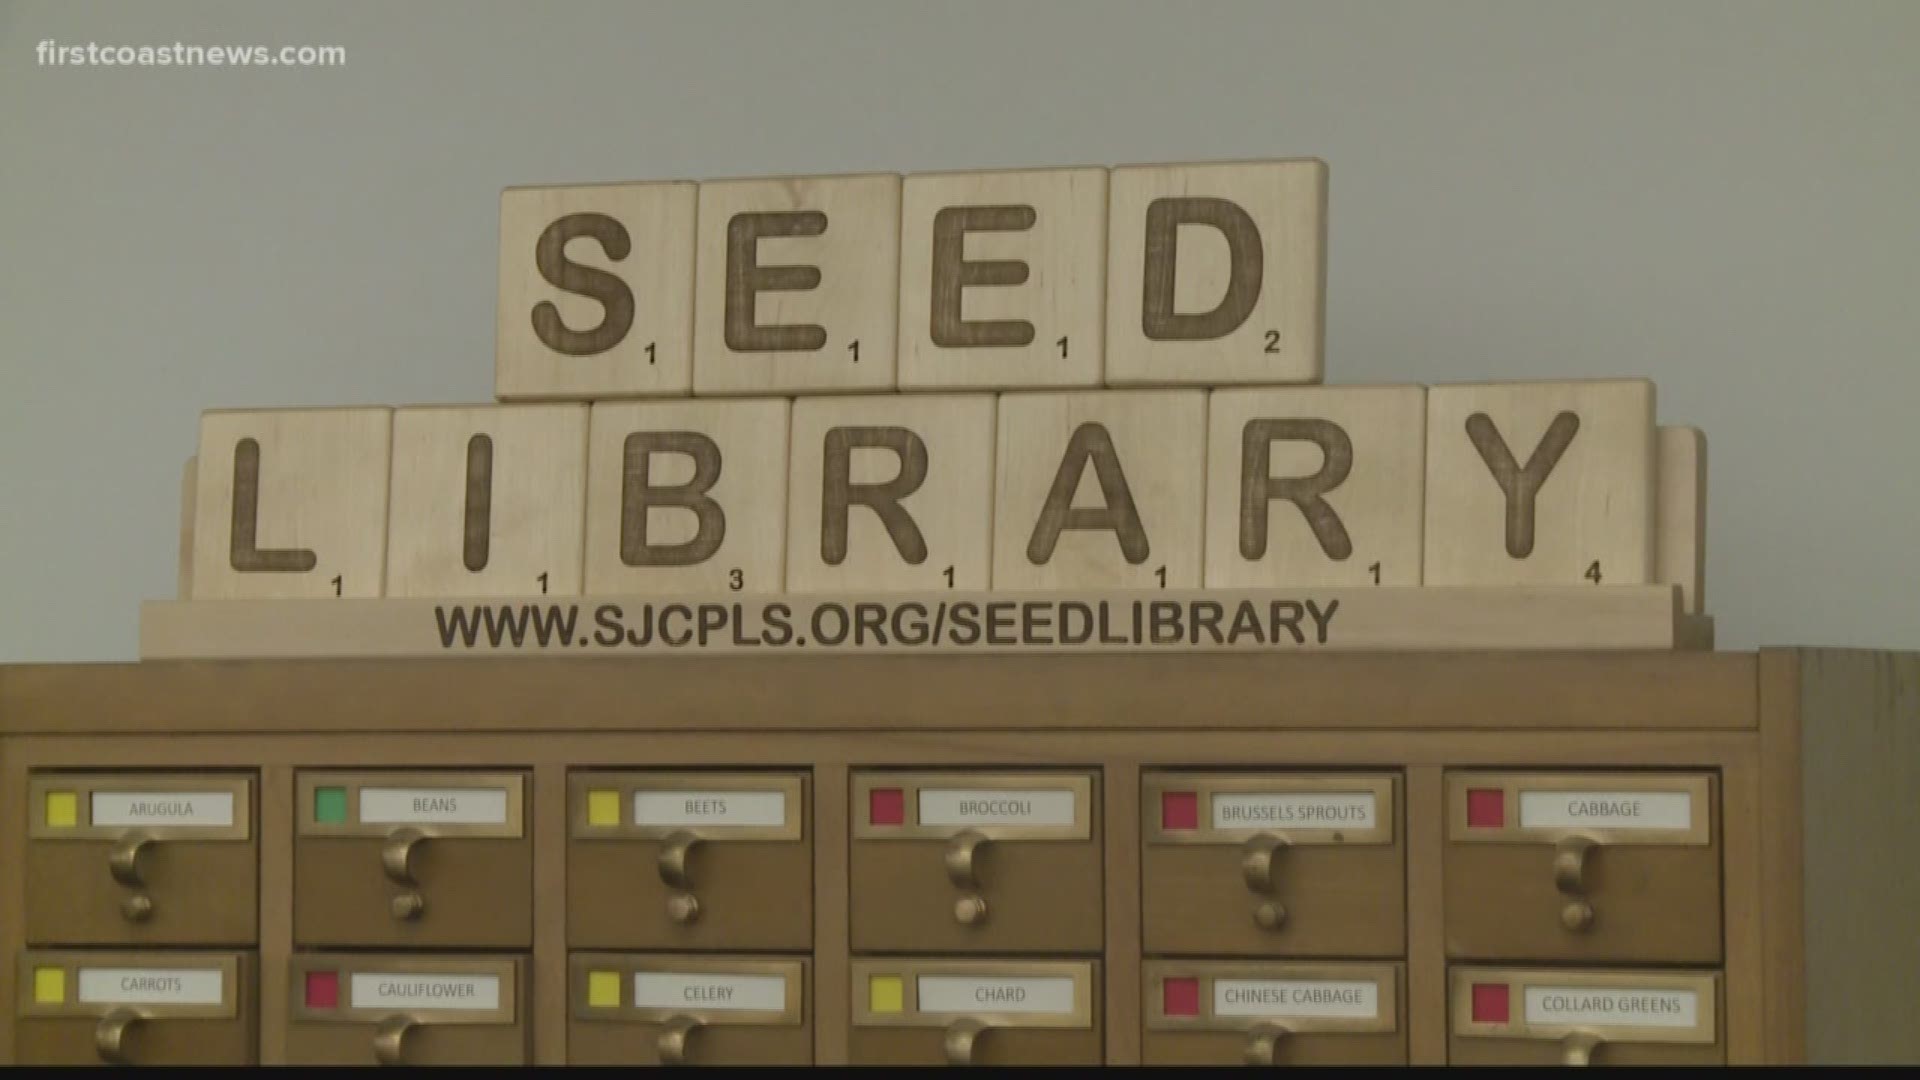 The Seed Library will be at the Southeast Branch Library located on 6670 U.S. 1 South in St. Augustine.